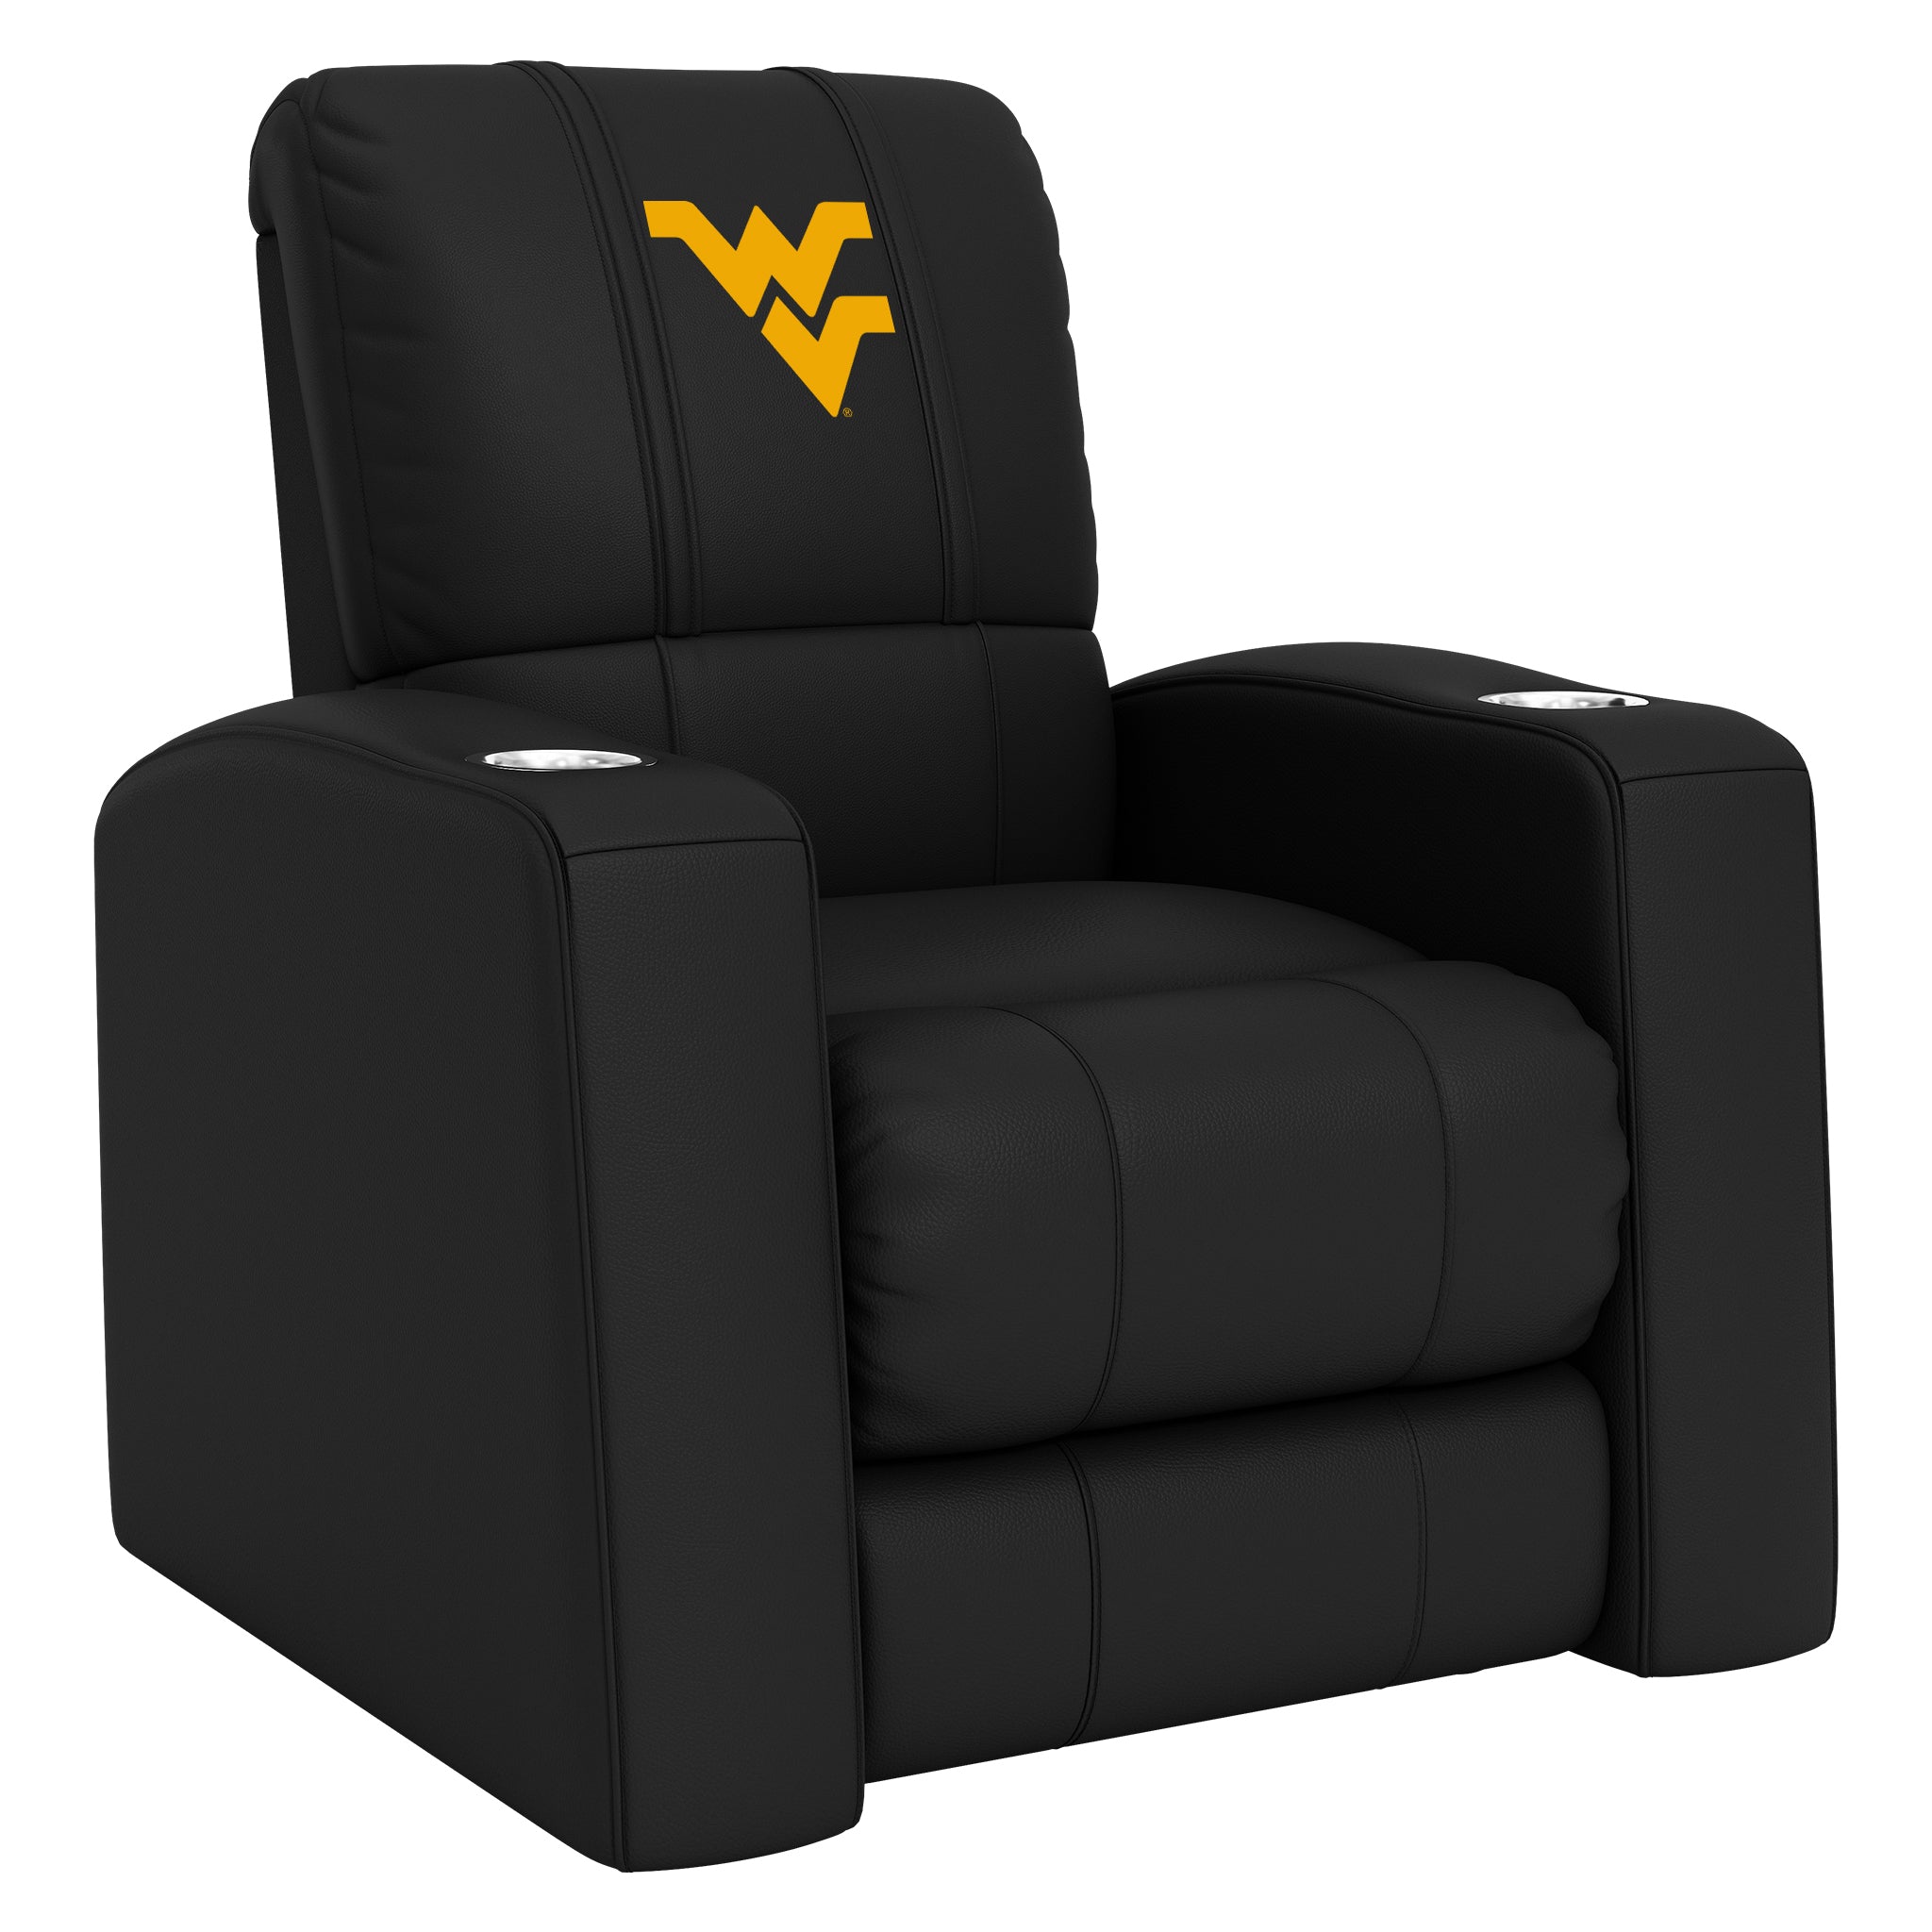 West Virginia Mountaineers Home Theater Recliner with West Virginia Mountaineers Logo